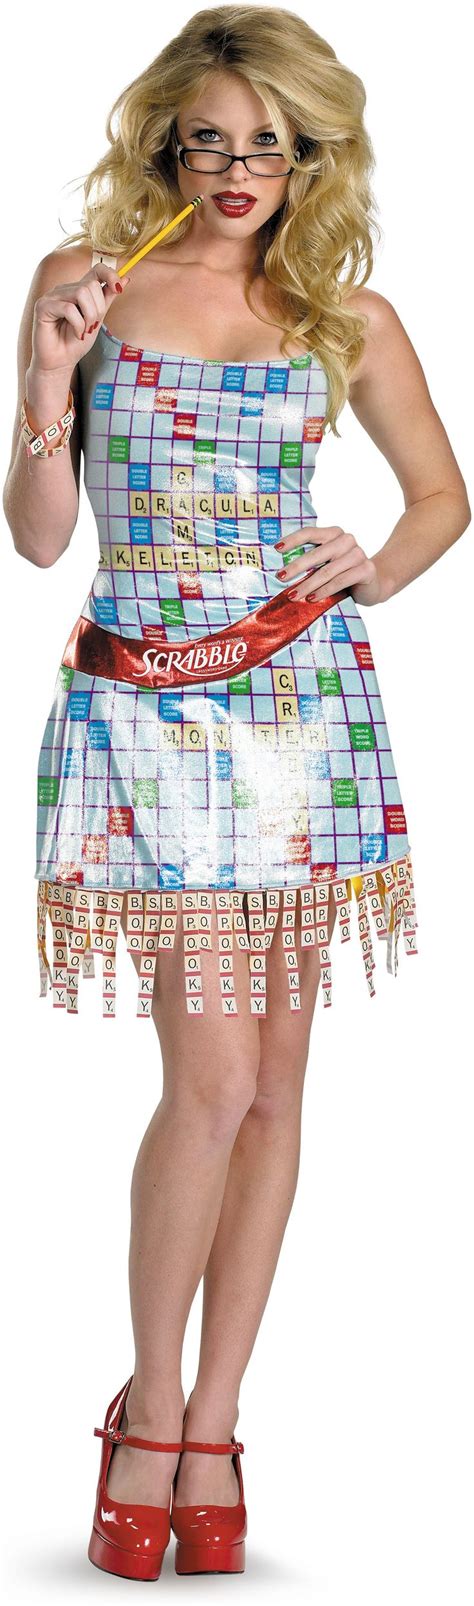 pin on board game costumes